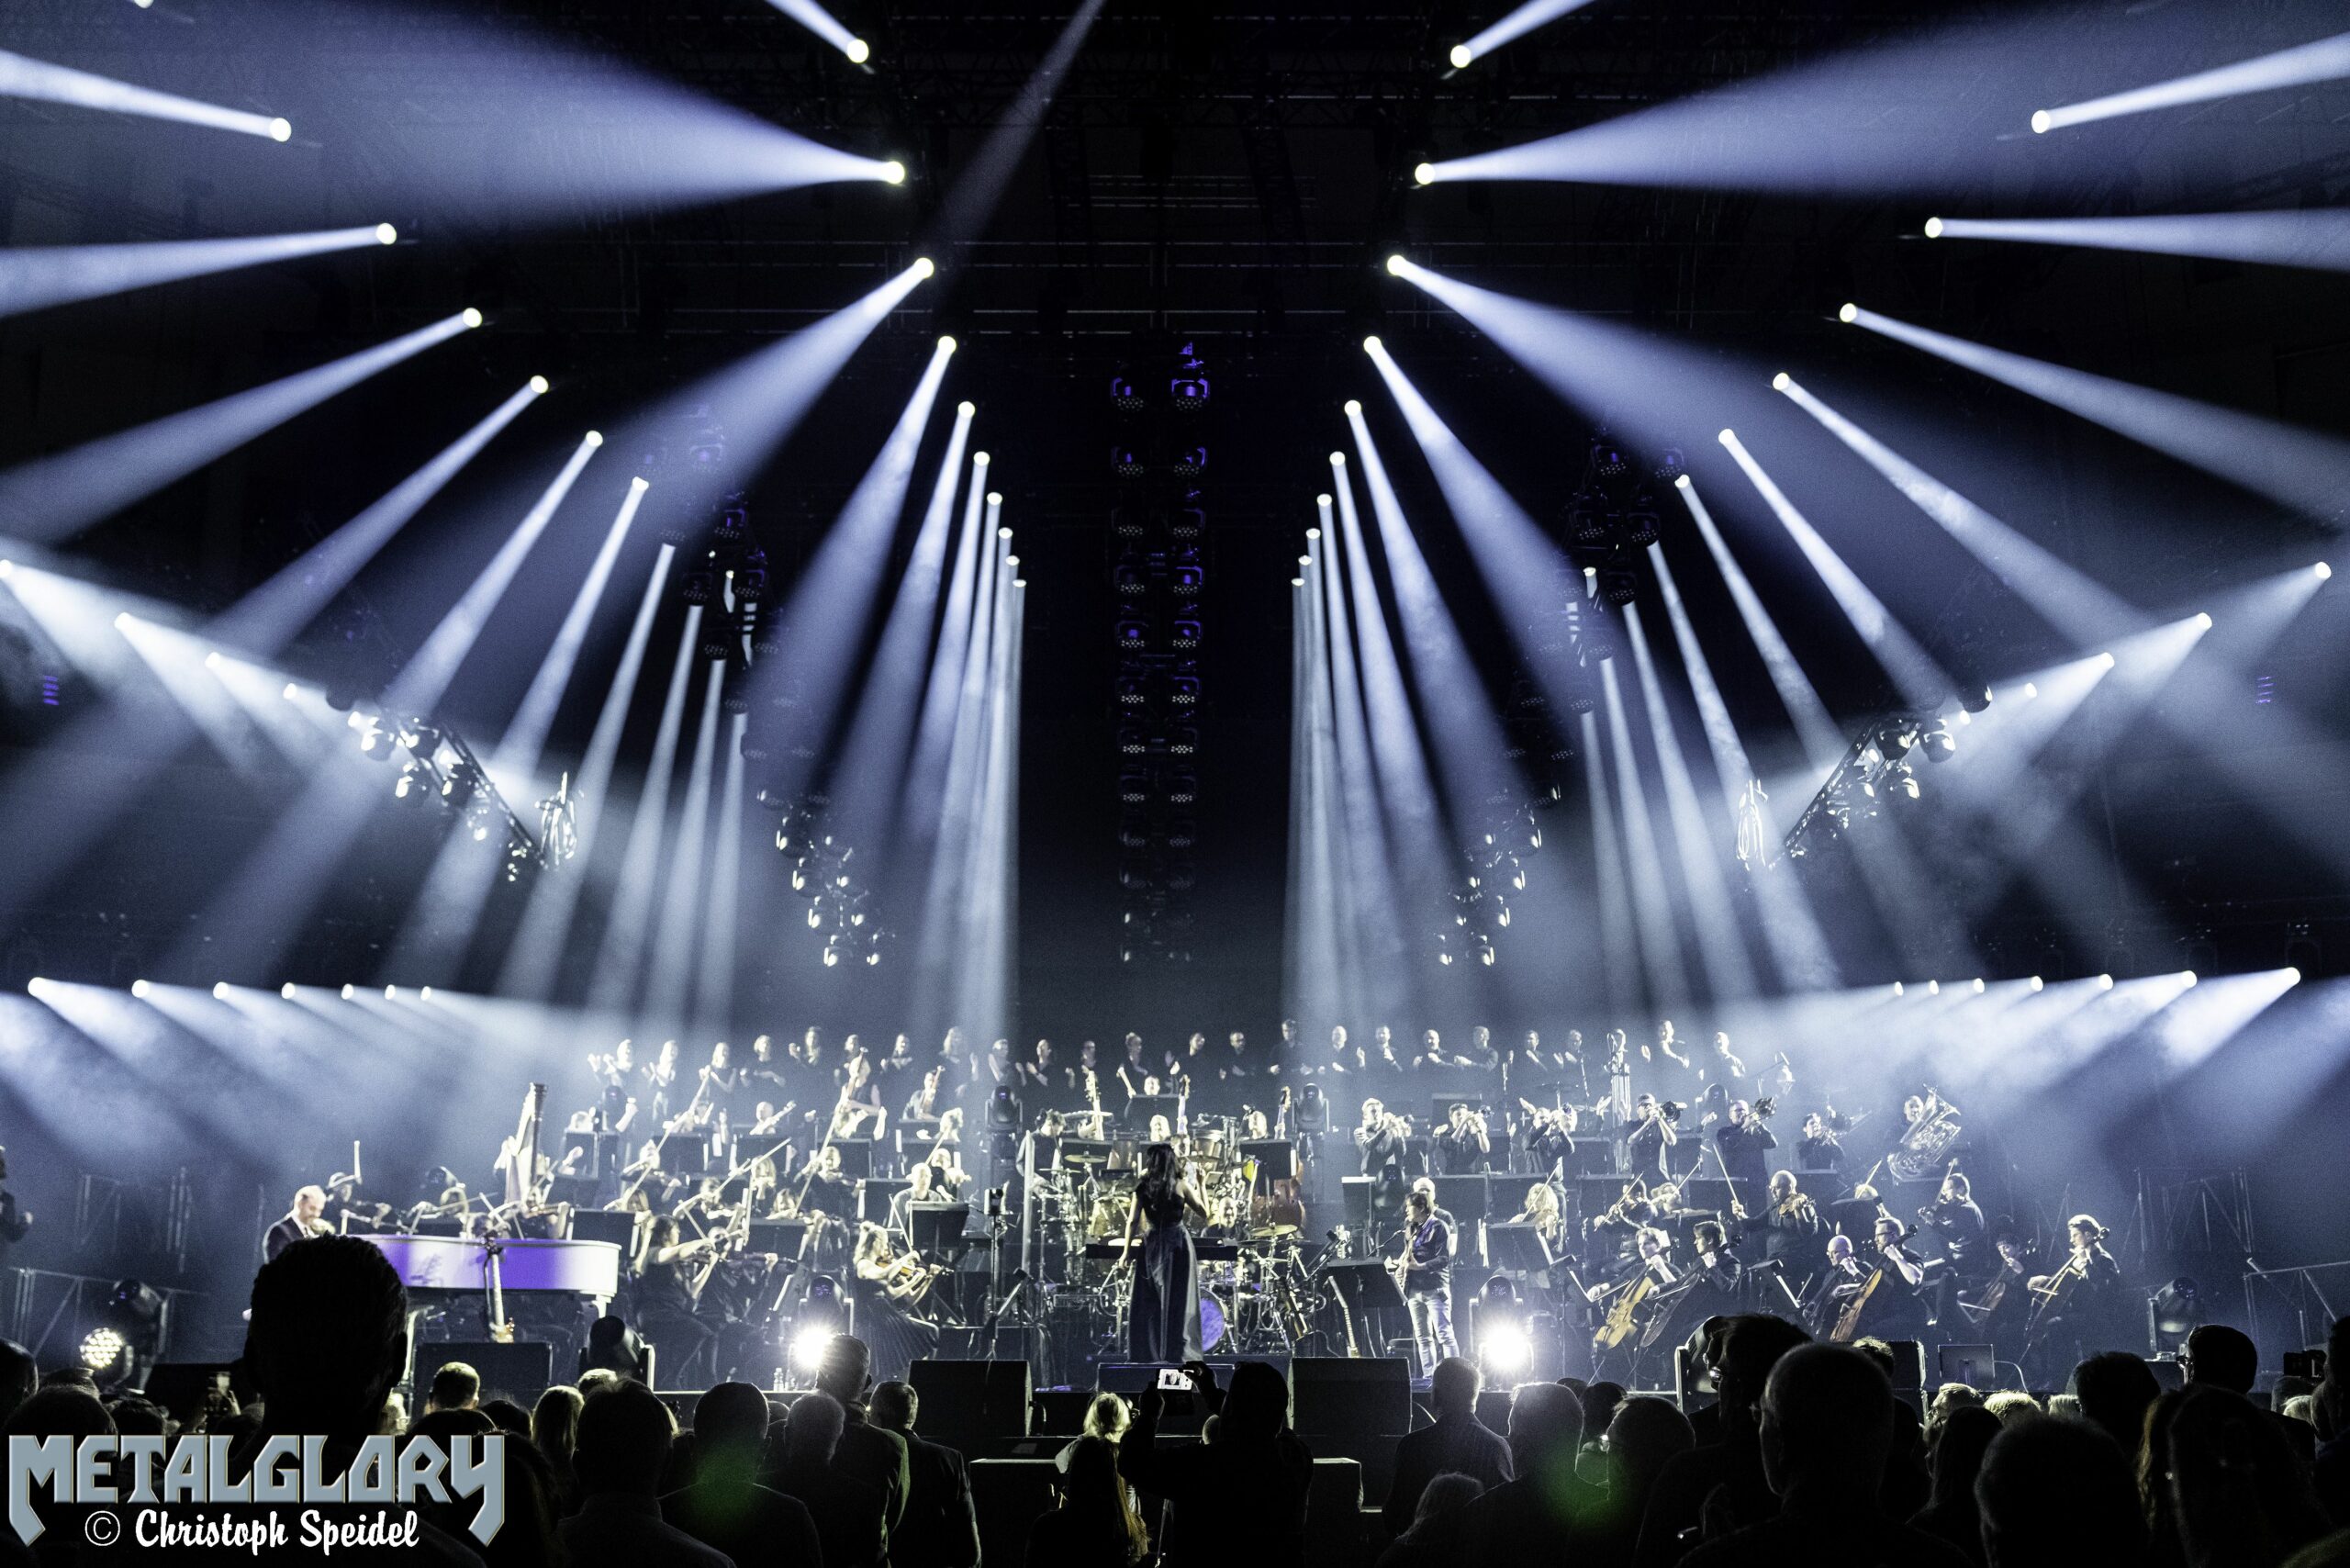 Night of the Proms 2022, 08.12.2022, ZAG Arena Hannover